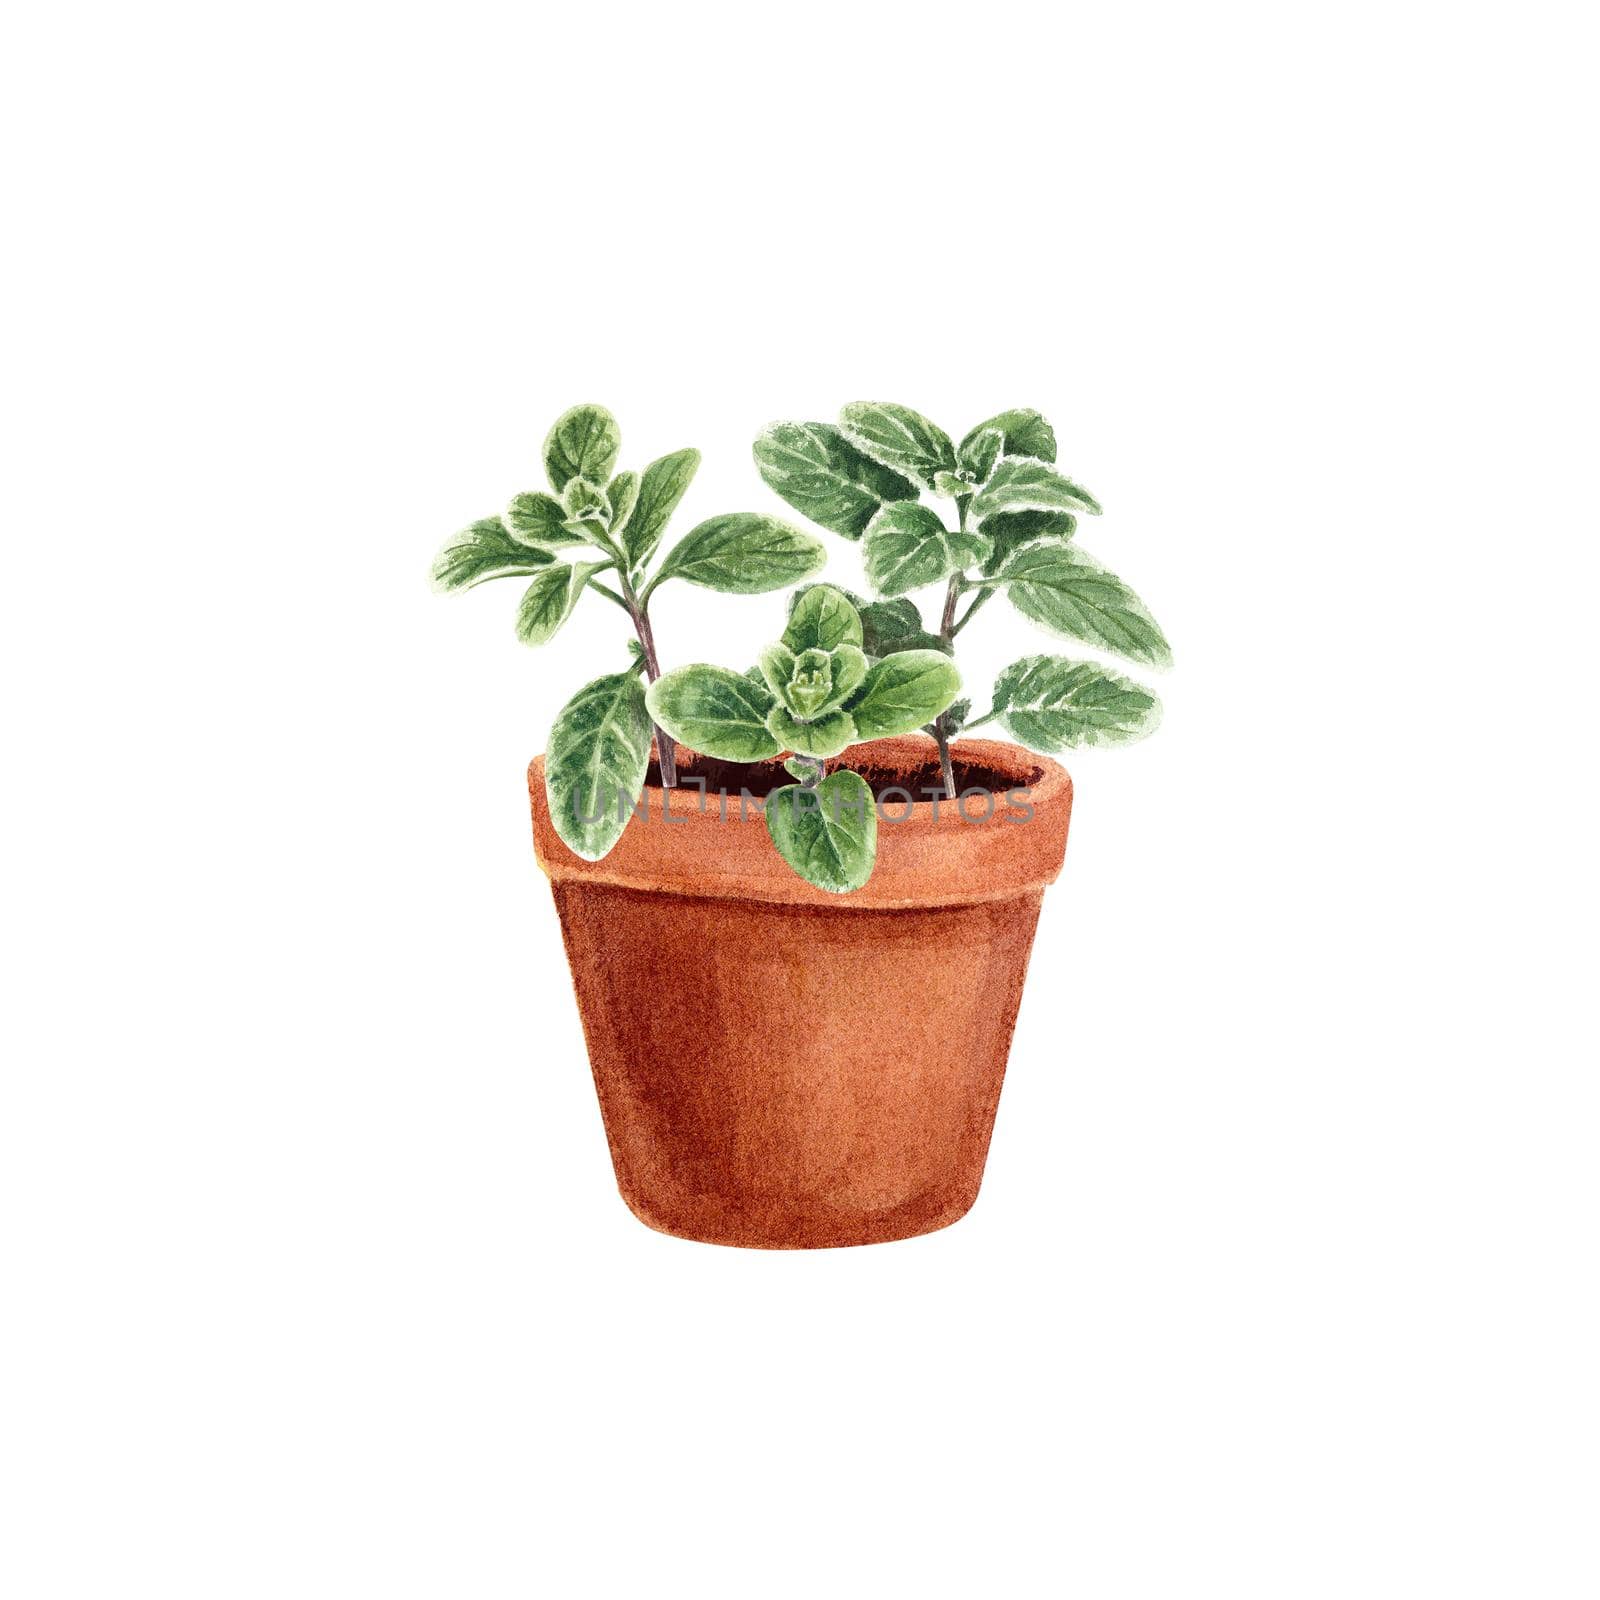 Marjoram in a pot isolated on a white background. Provencal herbs in watercolor. Illustration of kitchen herbs and spices. Suitable for postcards, business cards, banners, booklets, design, textiles.